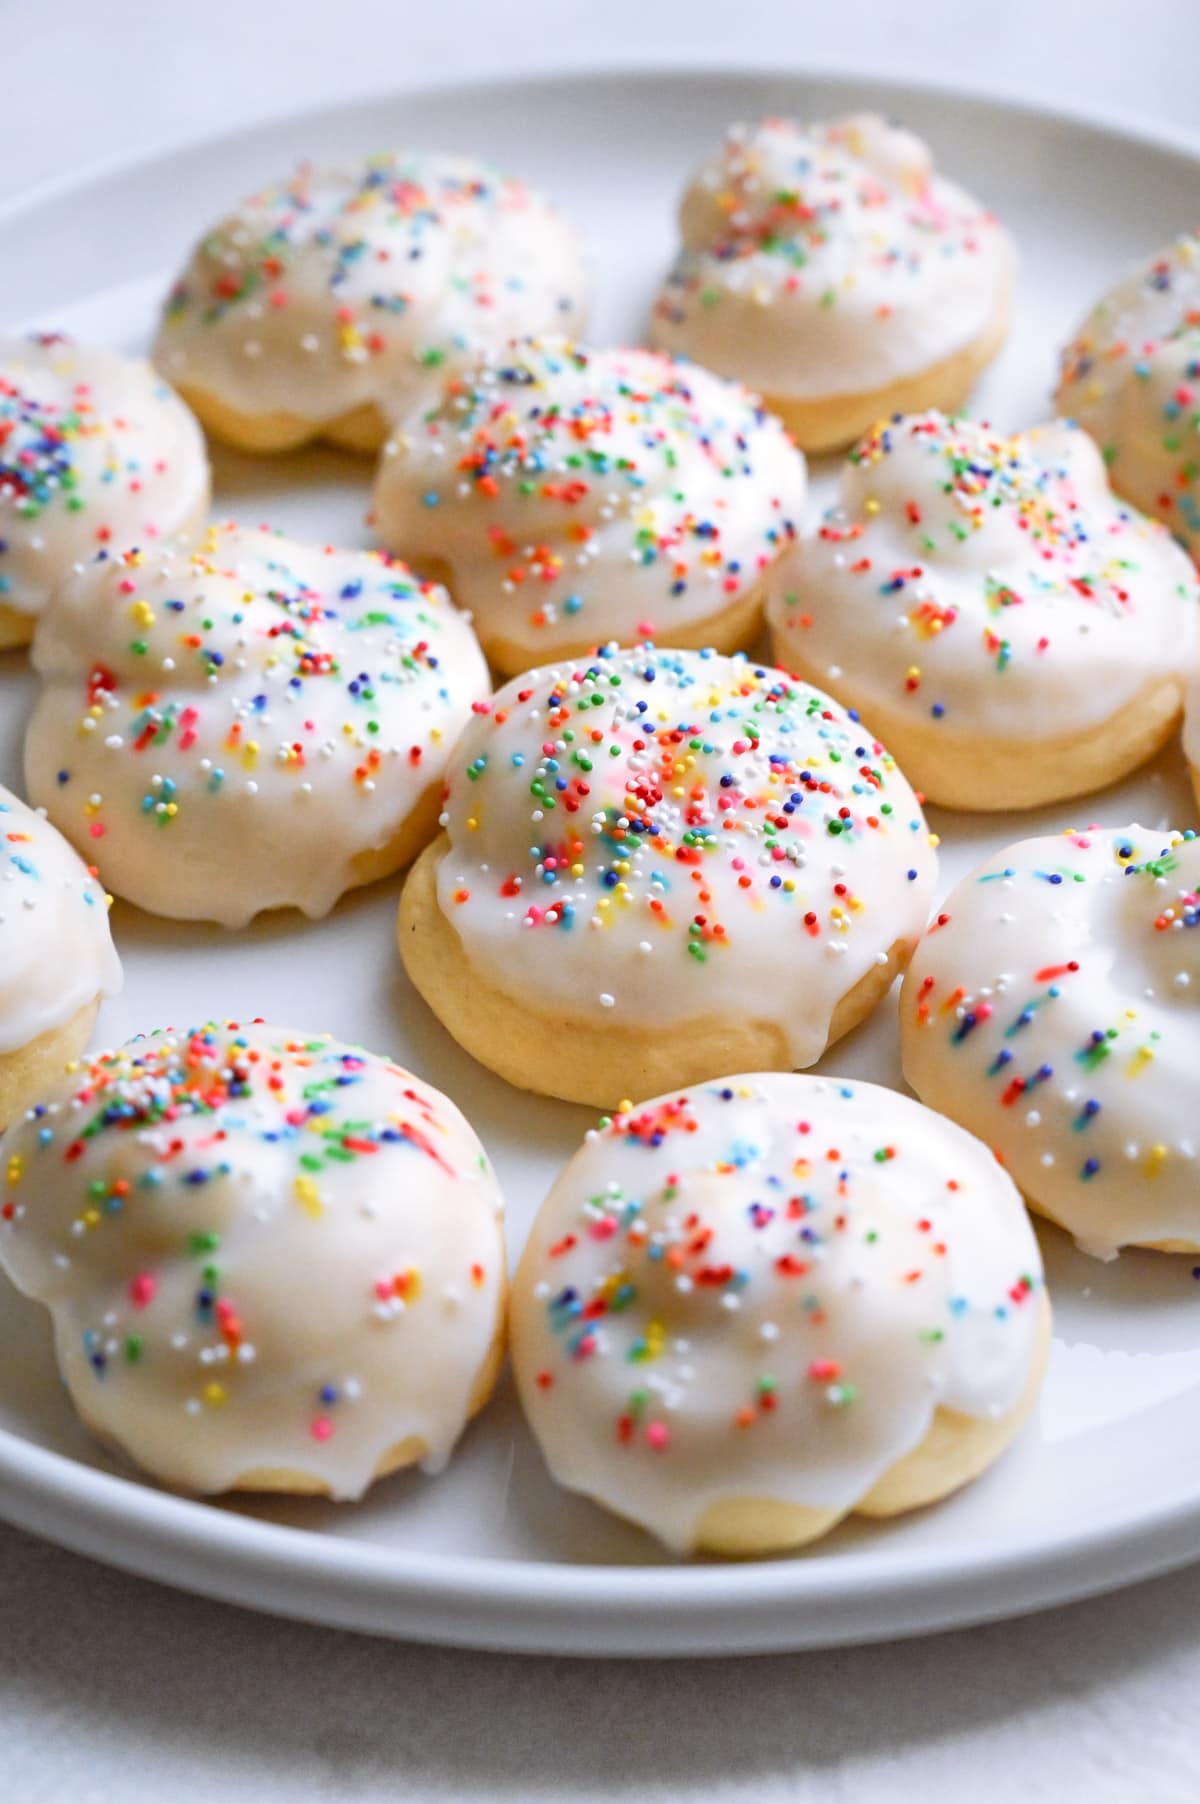 Plate of Knot Cookies topped with rainbow nonpareil sprinkles on a white plate.